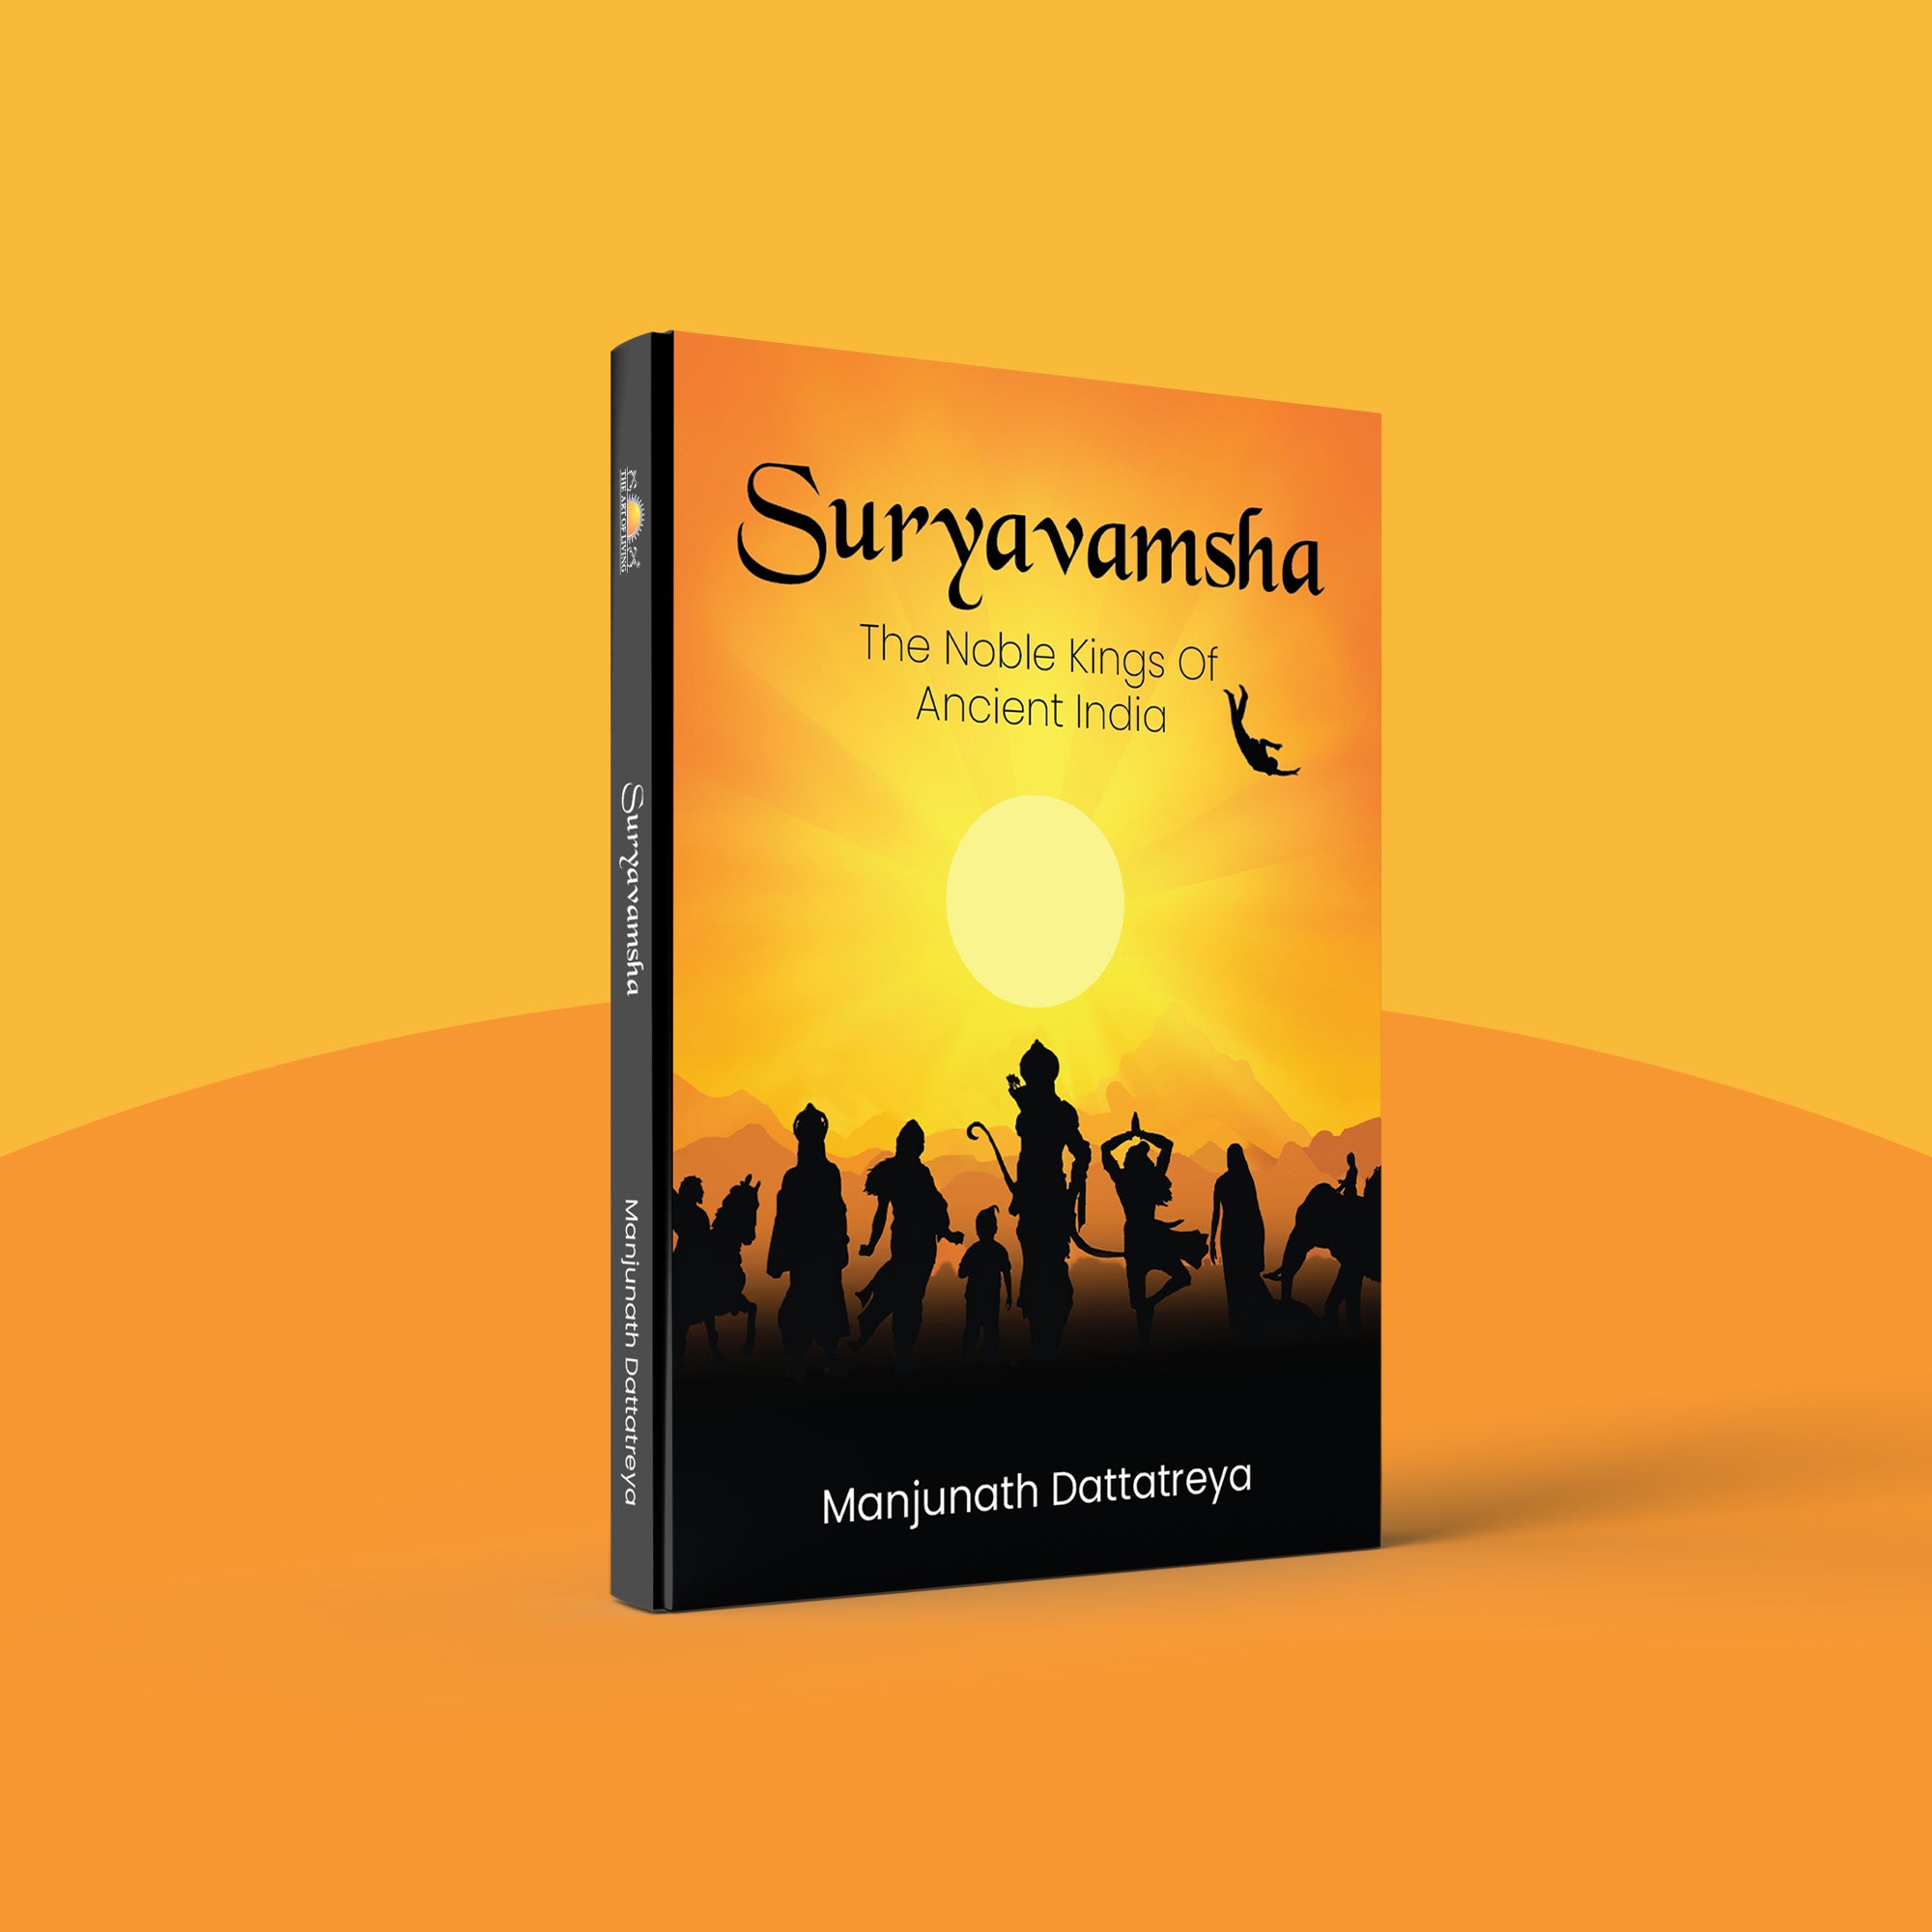 SURYAVAMSHA: The Noble Kings of Ancient India